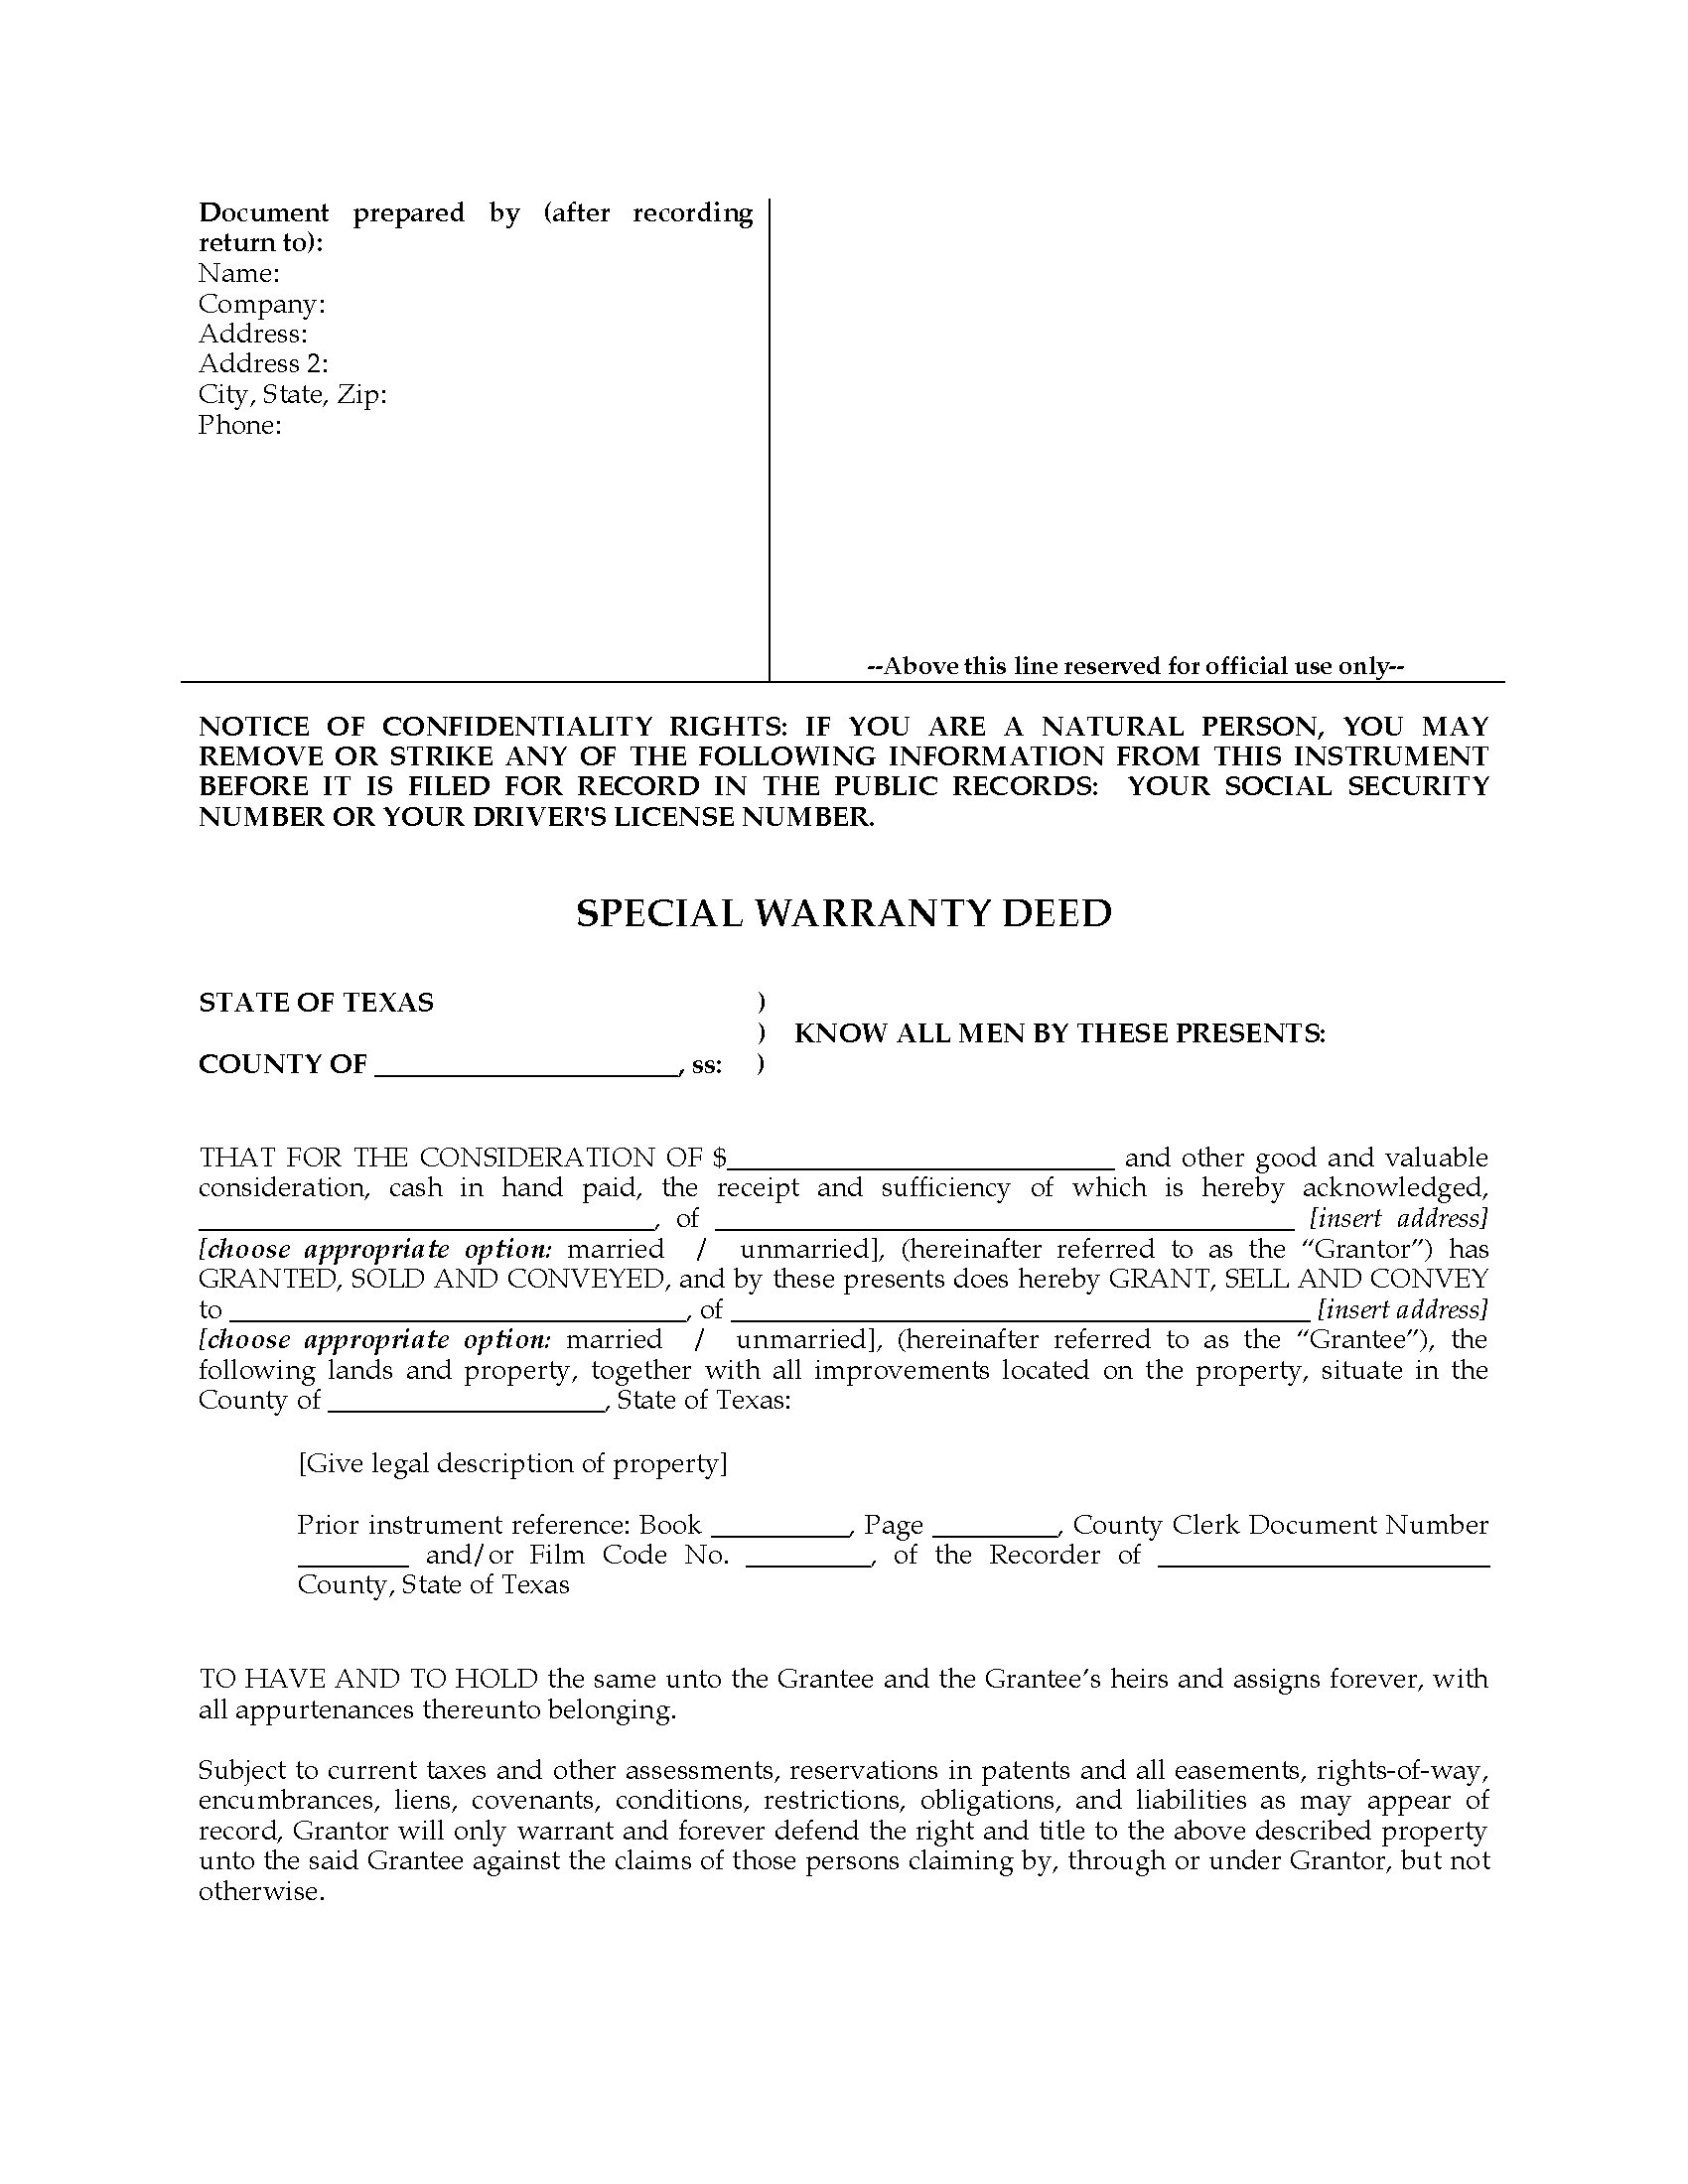 Texas Special Warranty Deed Legal Forms And Business Templates Megadox Com